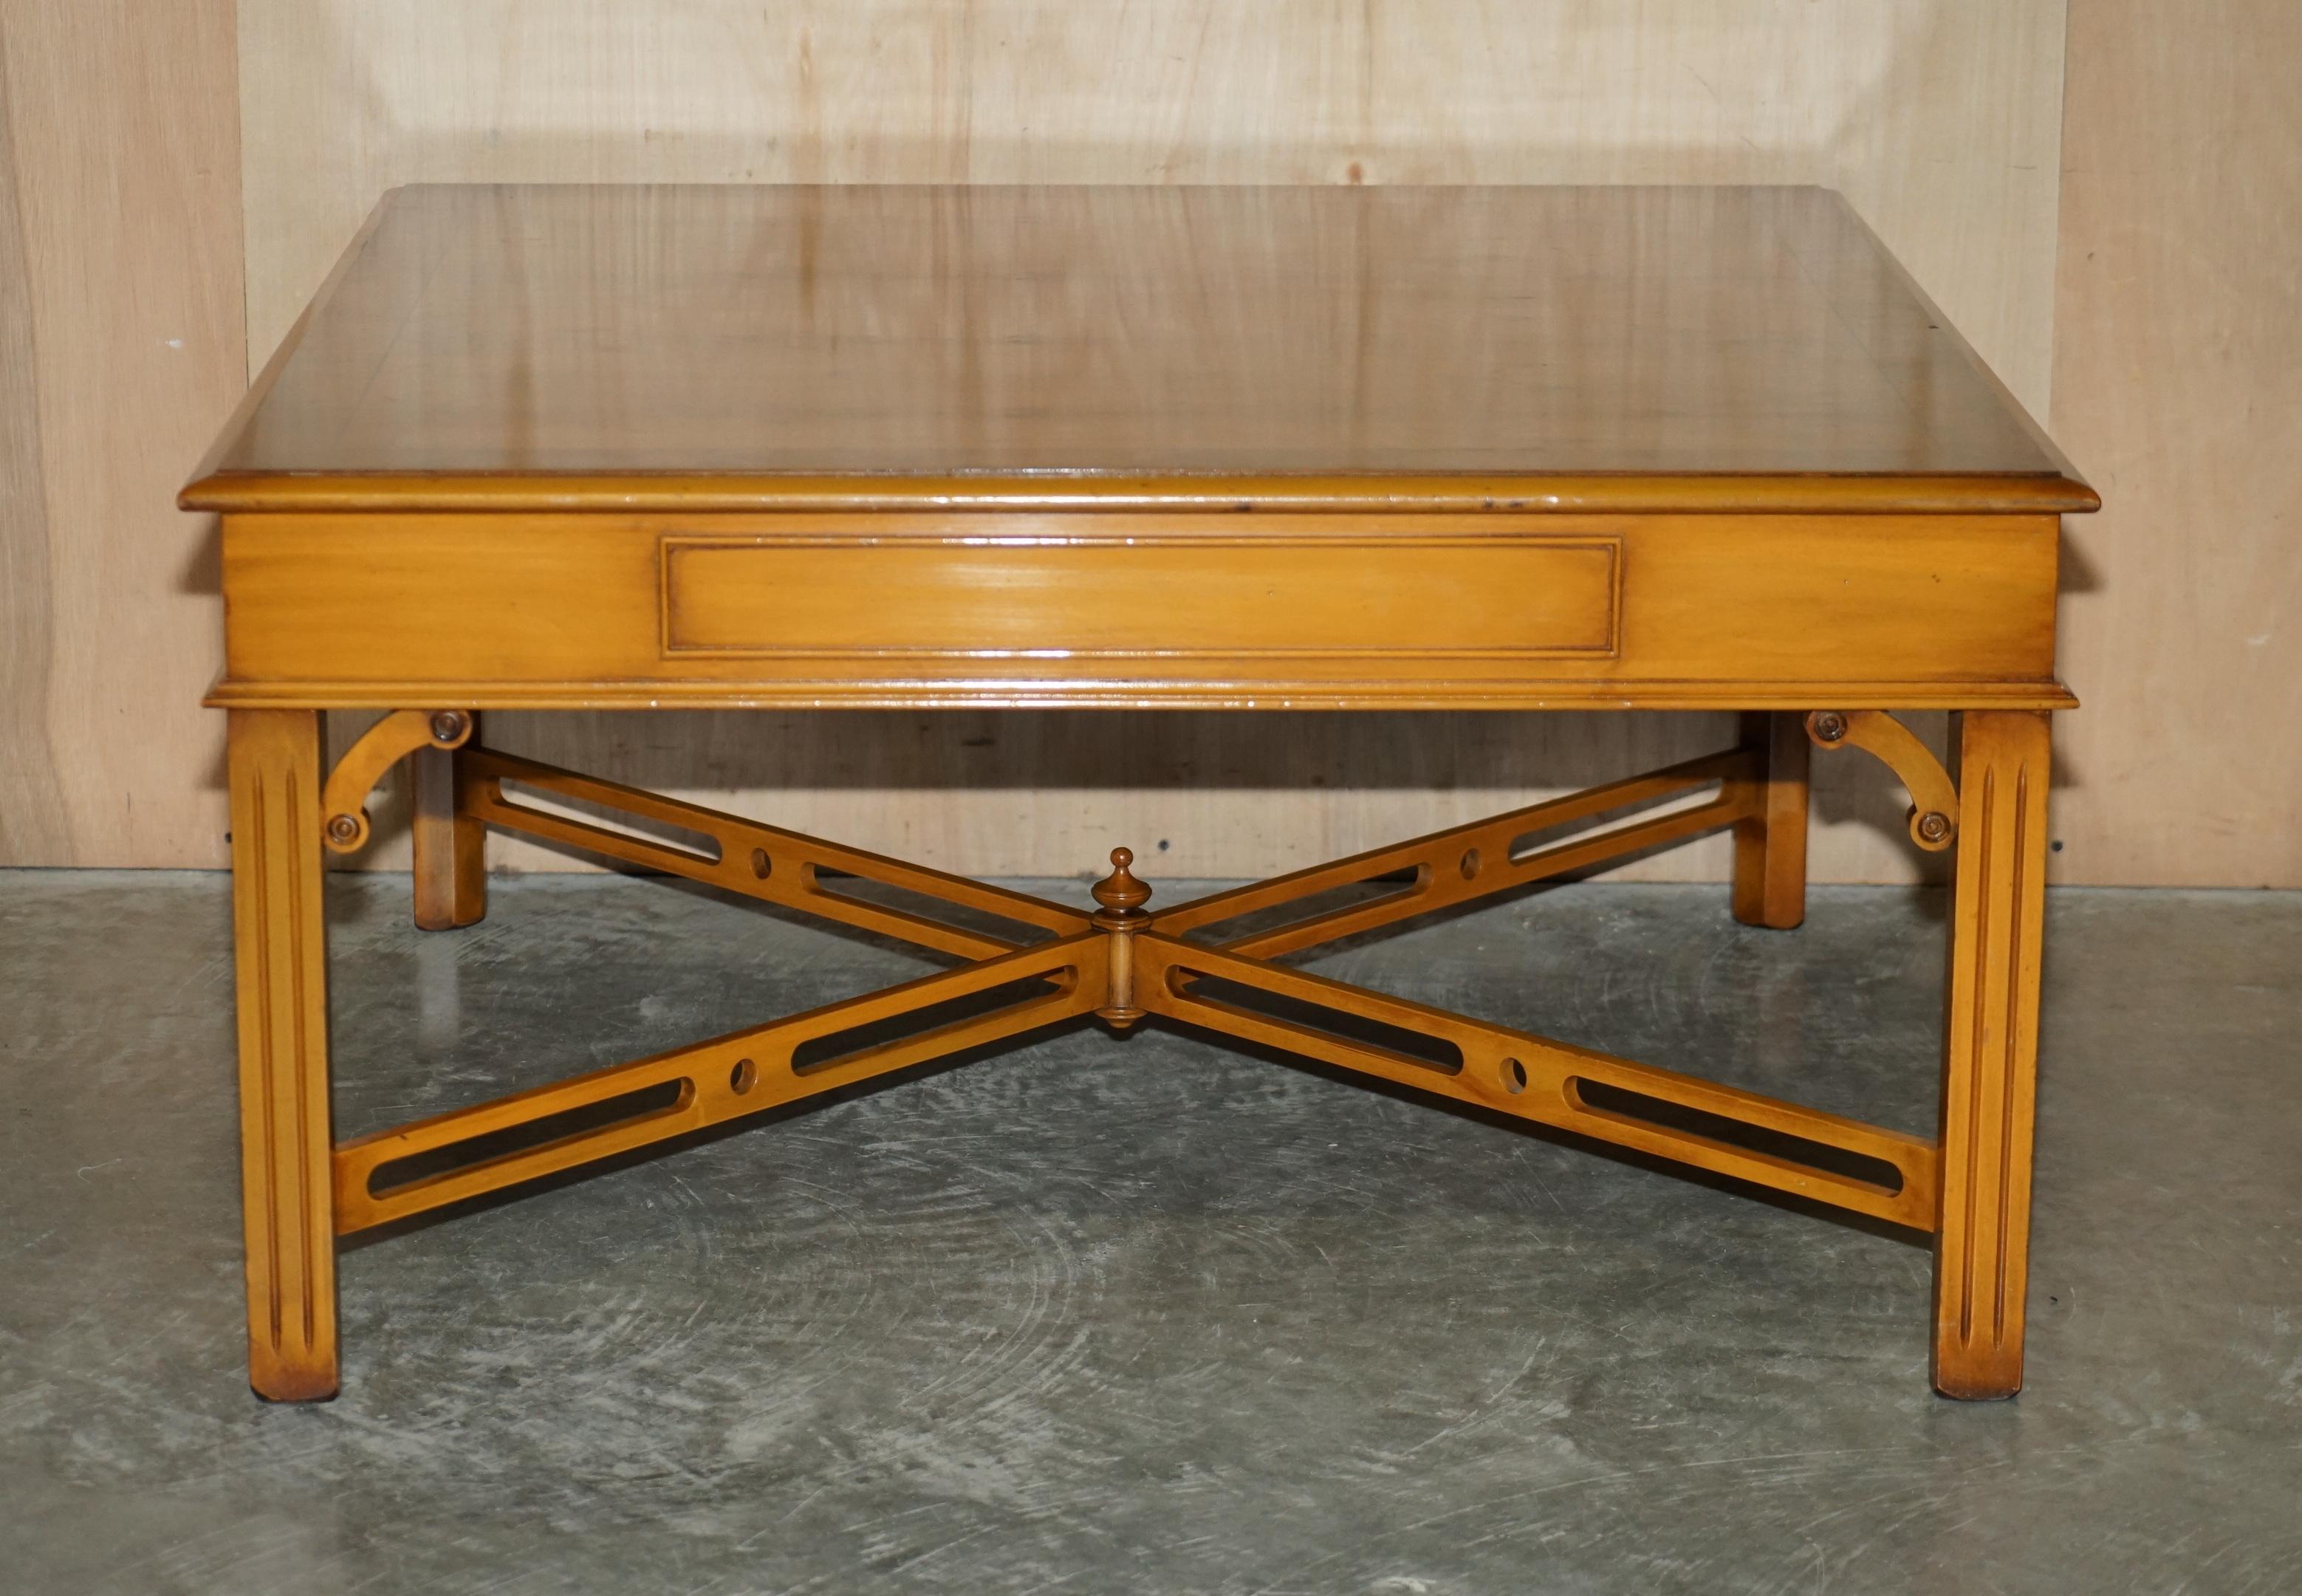 LOVELY BURR YEW WOOD TWO DRAWER COFFEE TABLE WiTH THOMAS CHIPPENDALE STRETCHES im Angebot 7